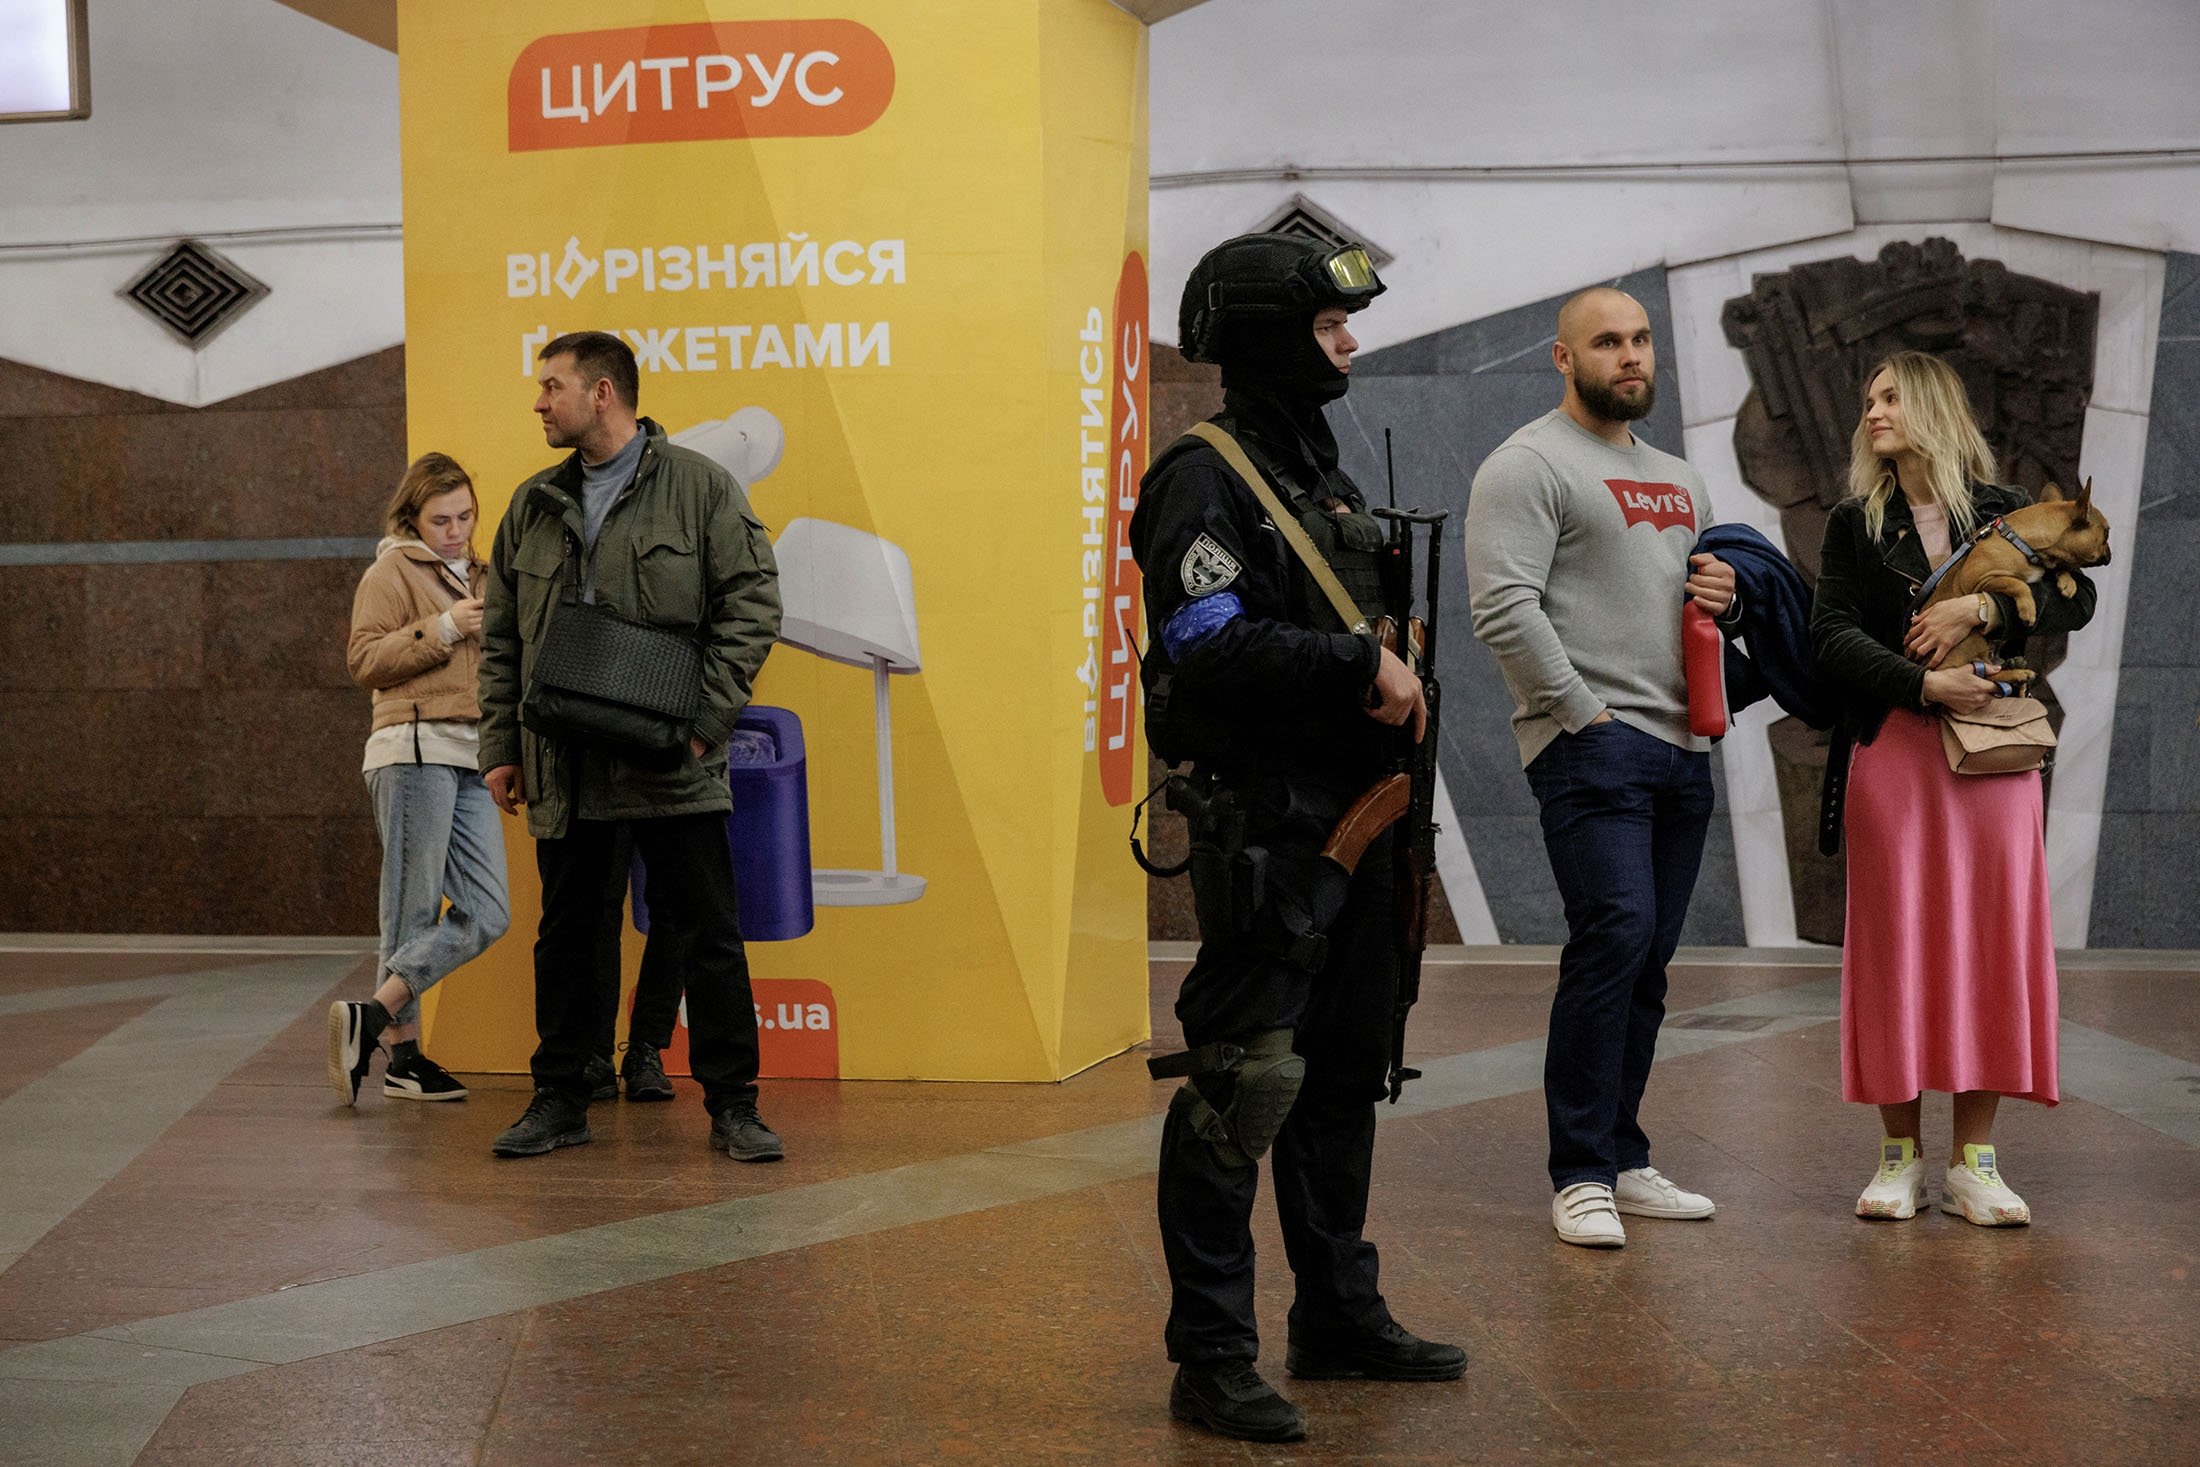 People wait for the start of a classical music concert performed by local musicians at a metro station that serves as a bomb shelter as the Russian attack on Ukraine continues in Kharkiv, Ukraine, on 26 March 2022. (Photo Reuters)